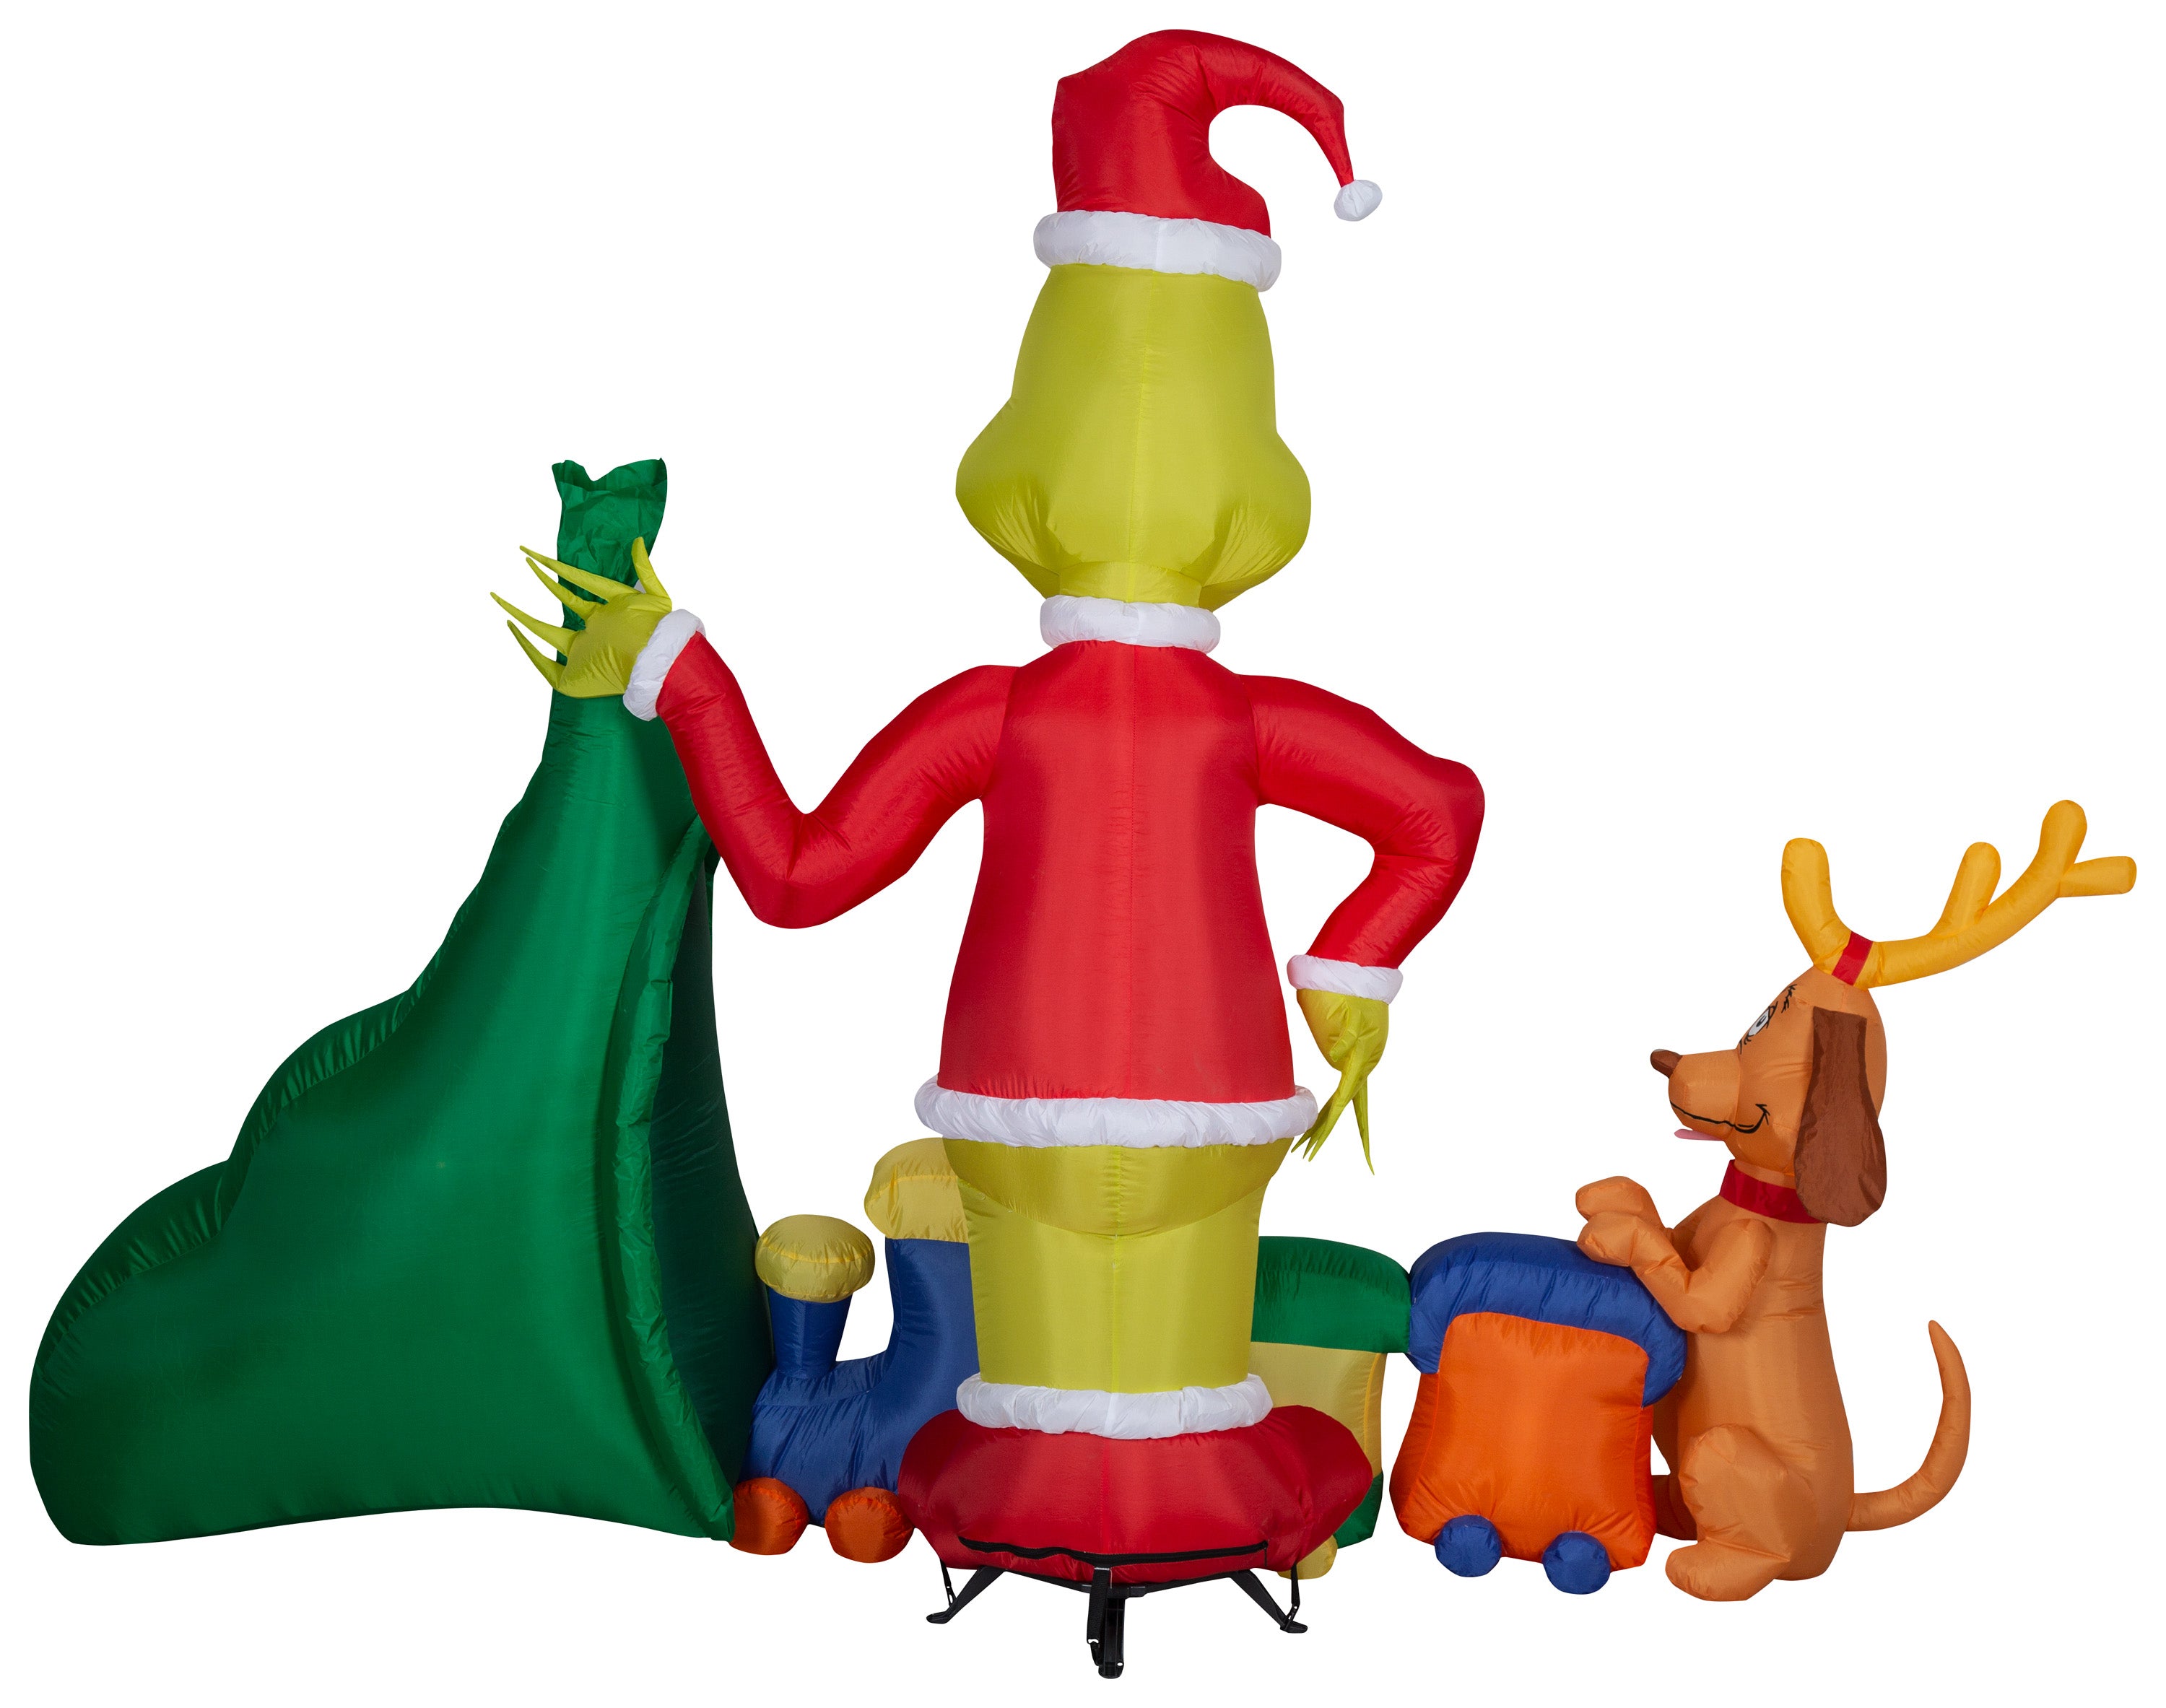 Gemmy Christmas Airblown Inflatable Grinch Putting Train in Santa Sack Scene Dr. Seuss, 6.5 ft Tall